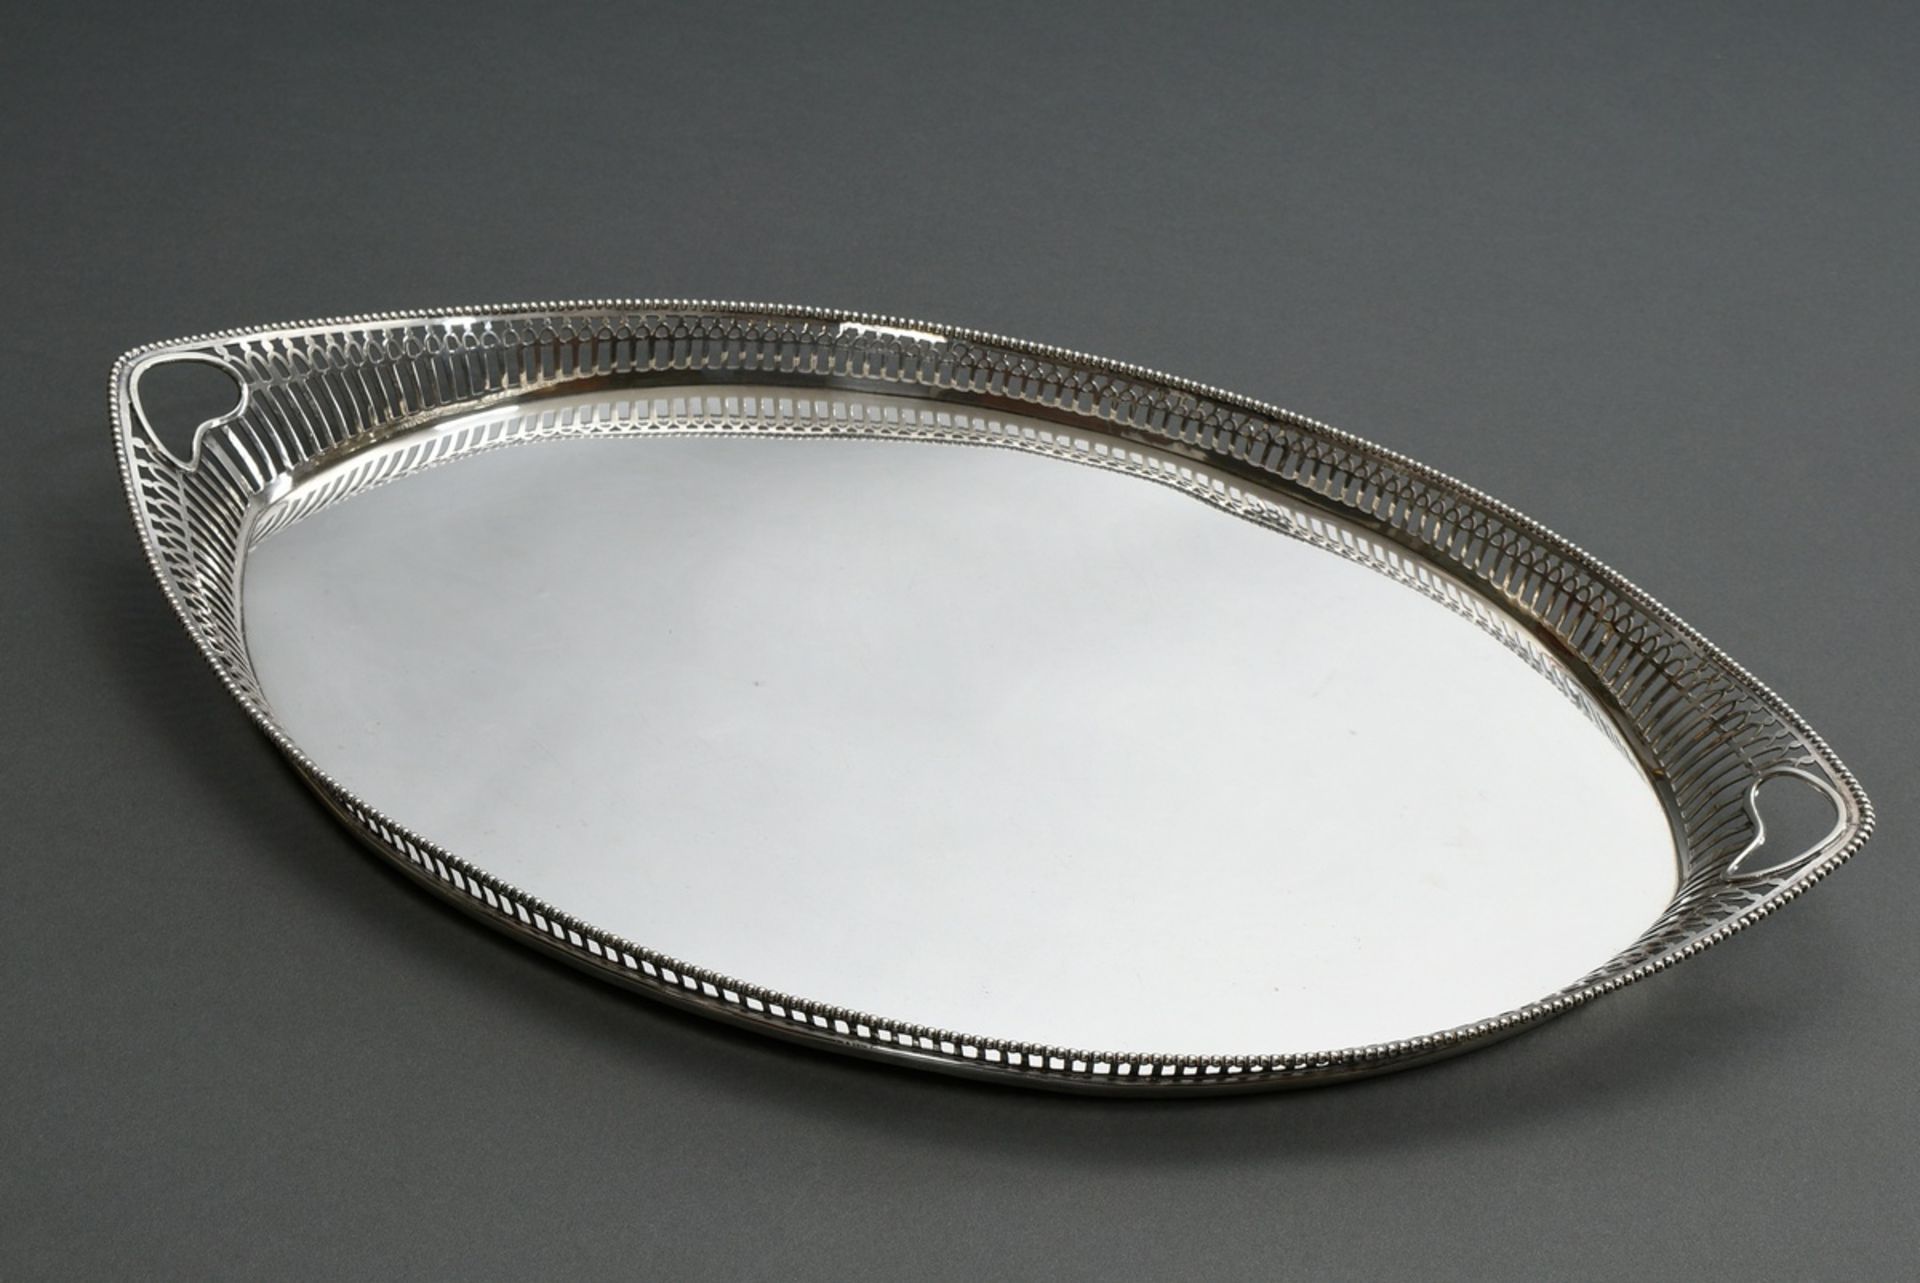 Dutch tray with lattice opening and beaded rim, MM: JdV (?), year mark 1915, silver 833, 1480g, 56x